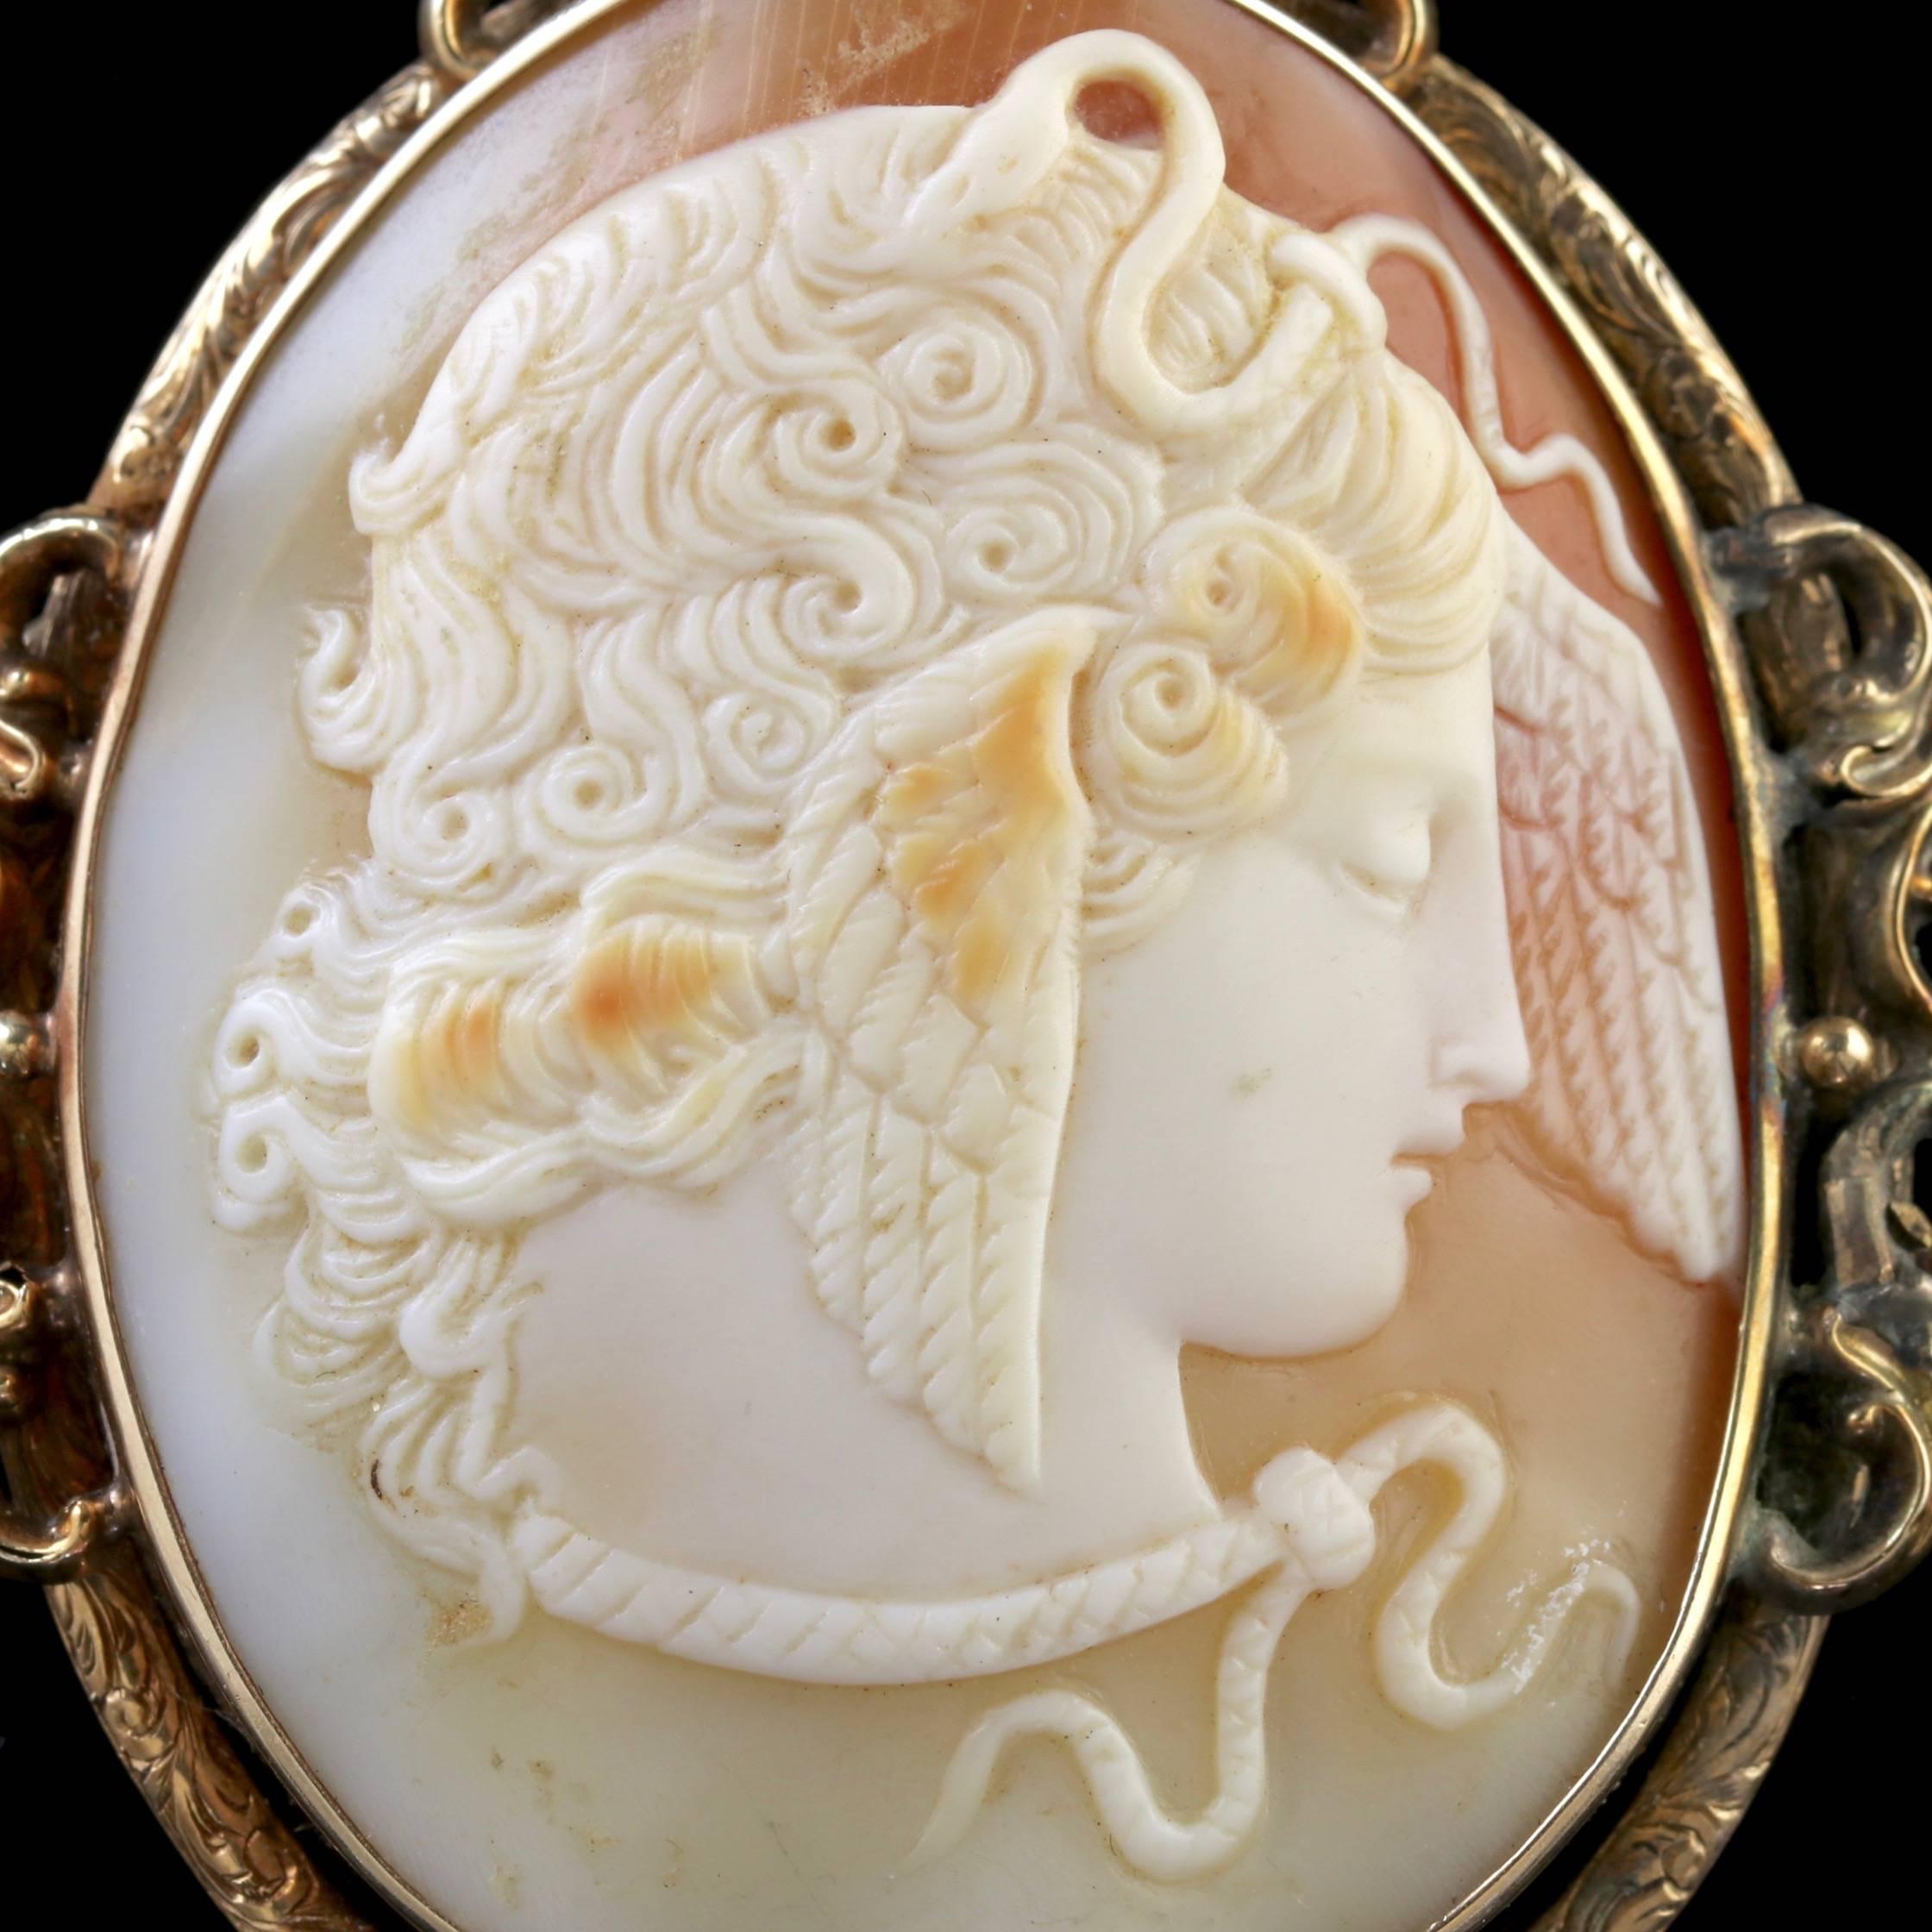 To read more please click continue reading below-

This magnificent antique Victorian 15ct Gold hand carved Medusa Cameo Brooch is Circa 1860. 

The Cameo depicts the Gorgon Medusa who was known in Greek mythology for her venomous stare which was